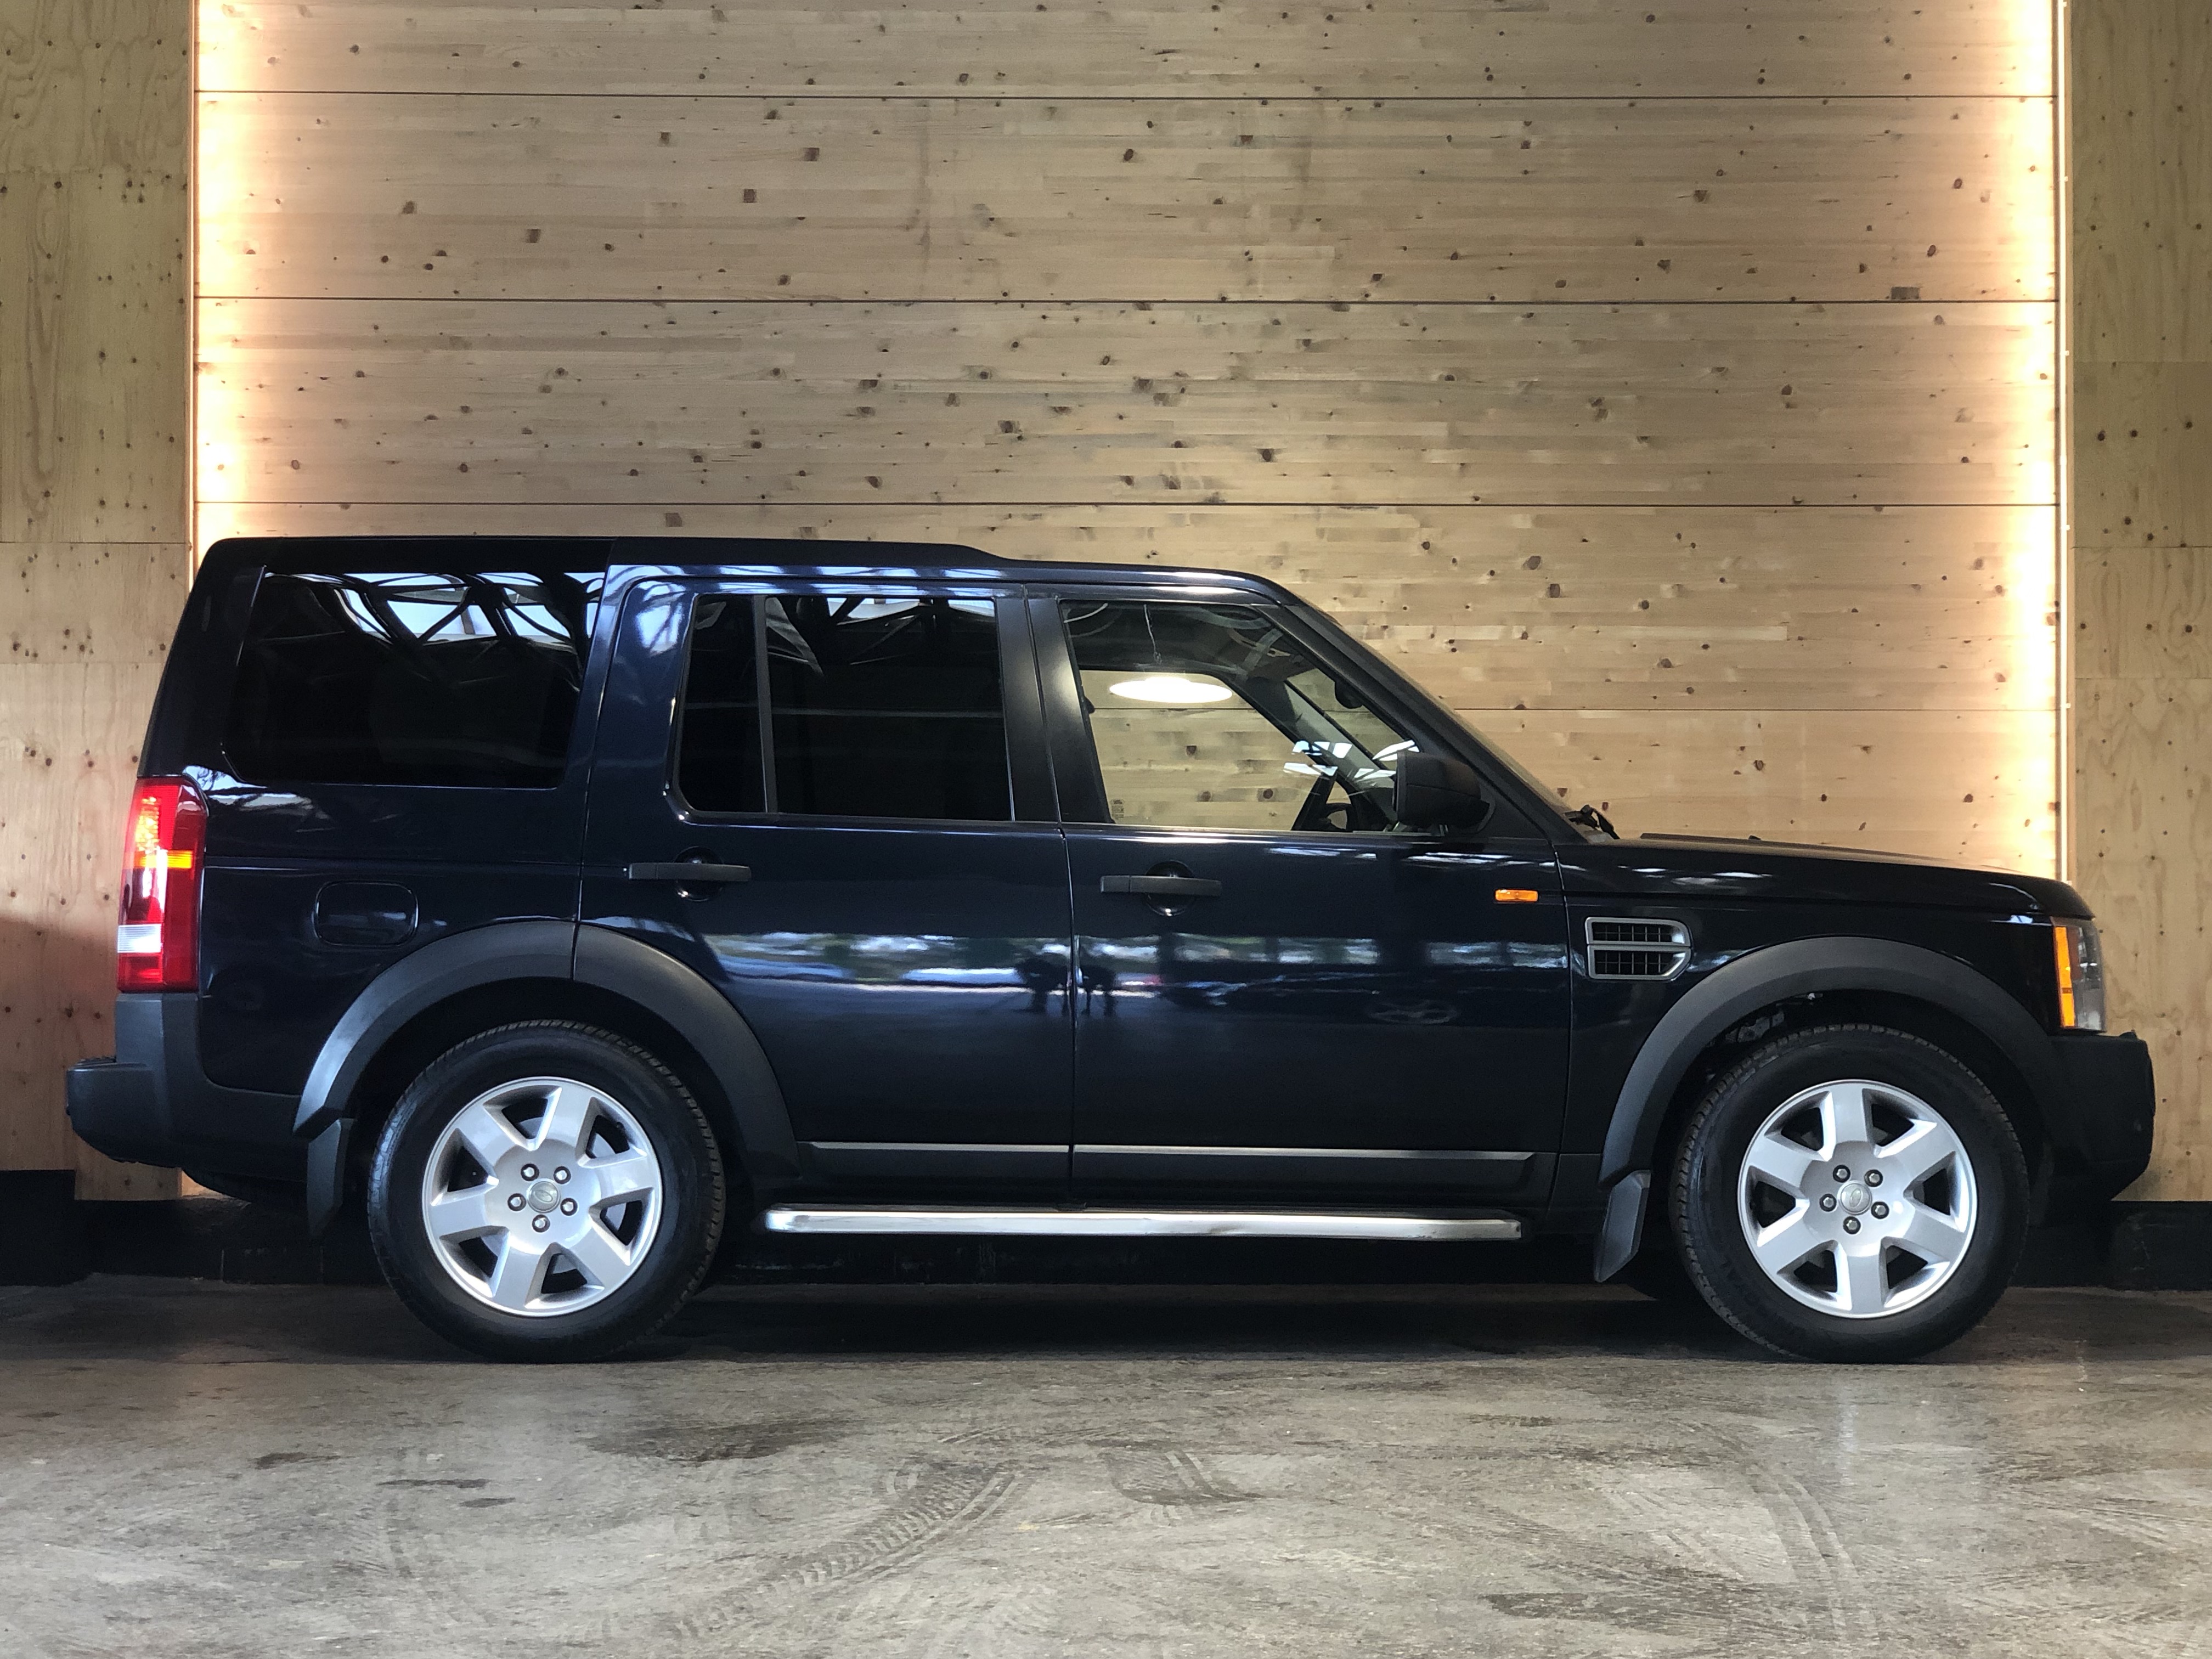 Land Rover Discovery V8 4.4 HSE 7 places